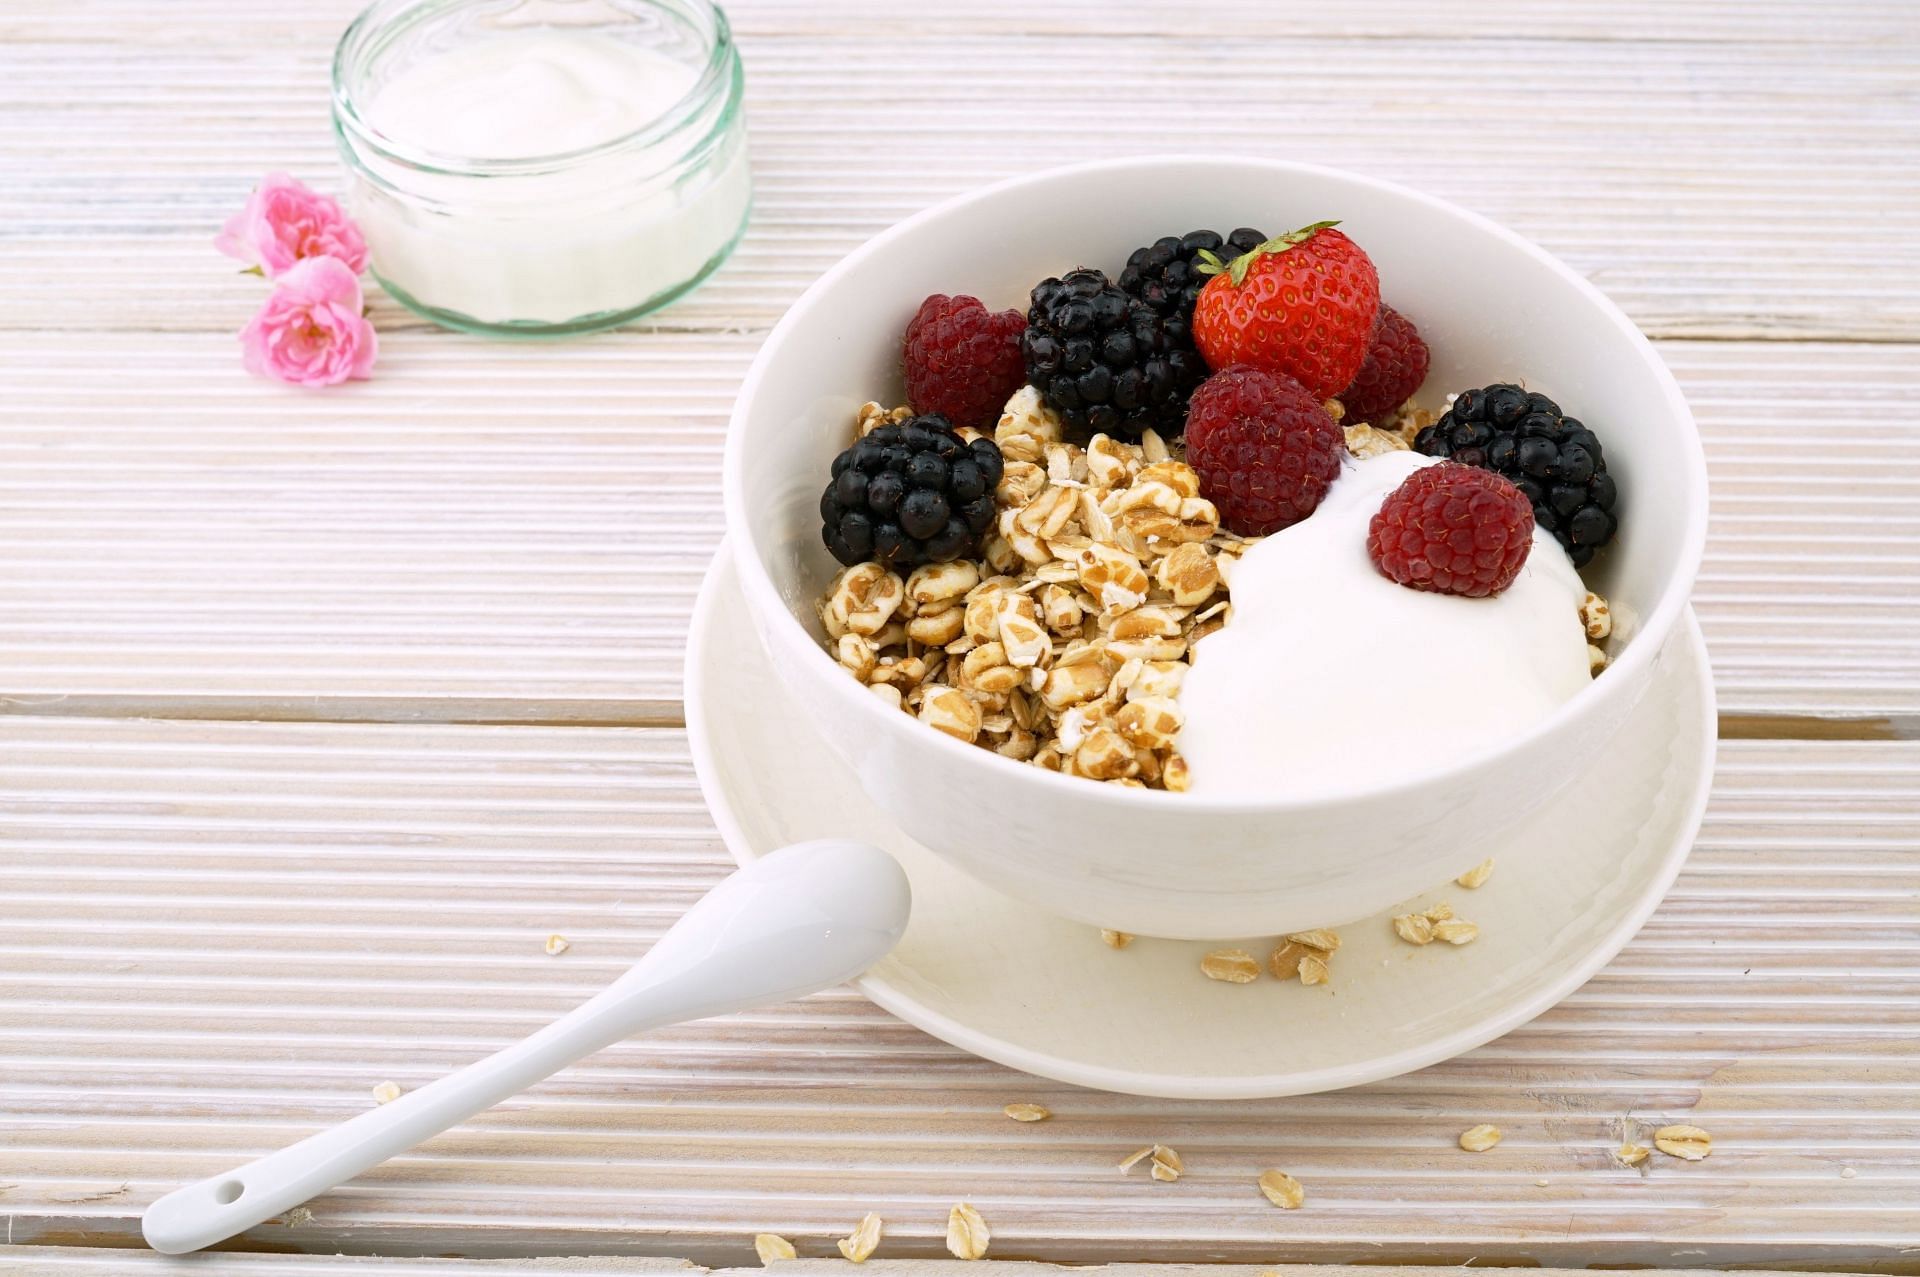 Yogurt is one of the best home remedies for yeast infection. (Image via Pexels/Life of Pix)